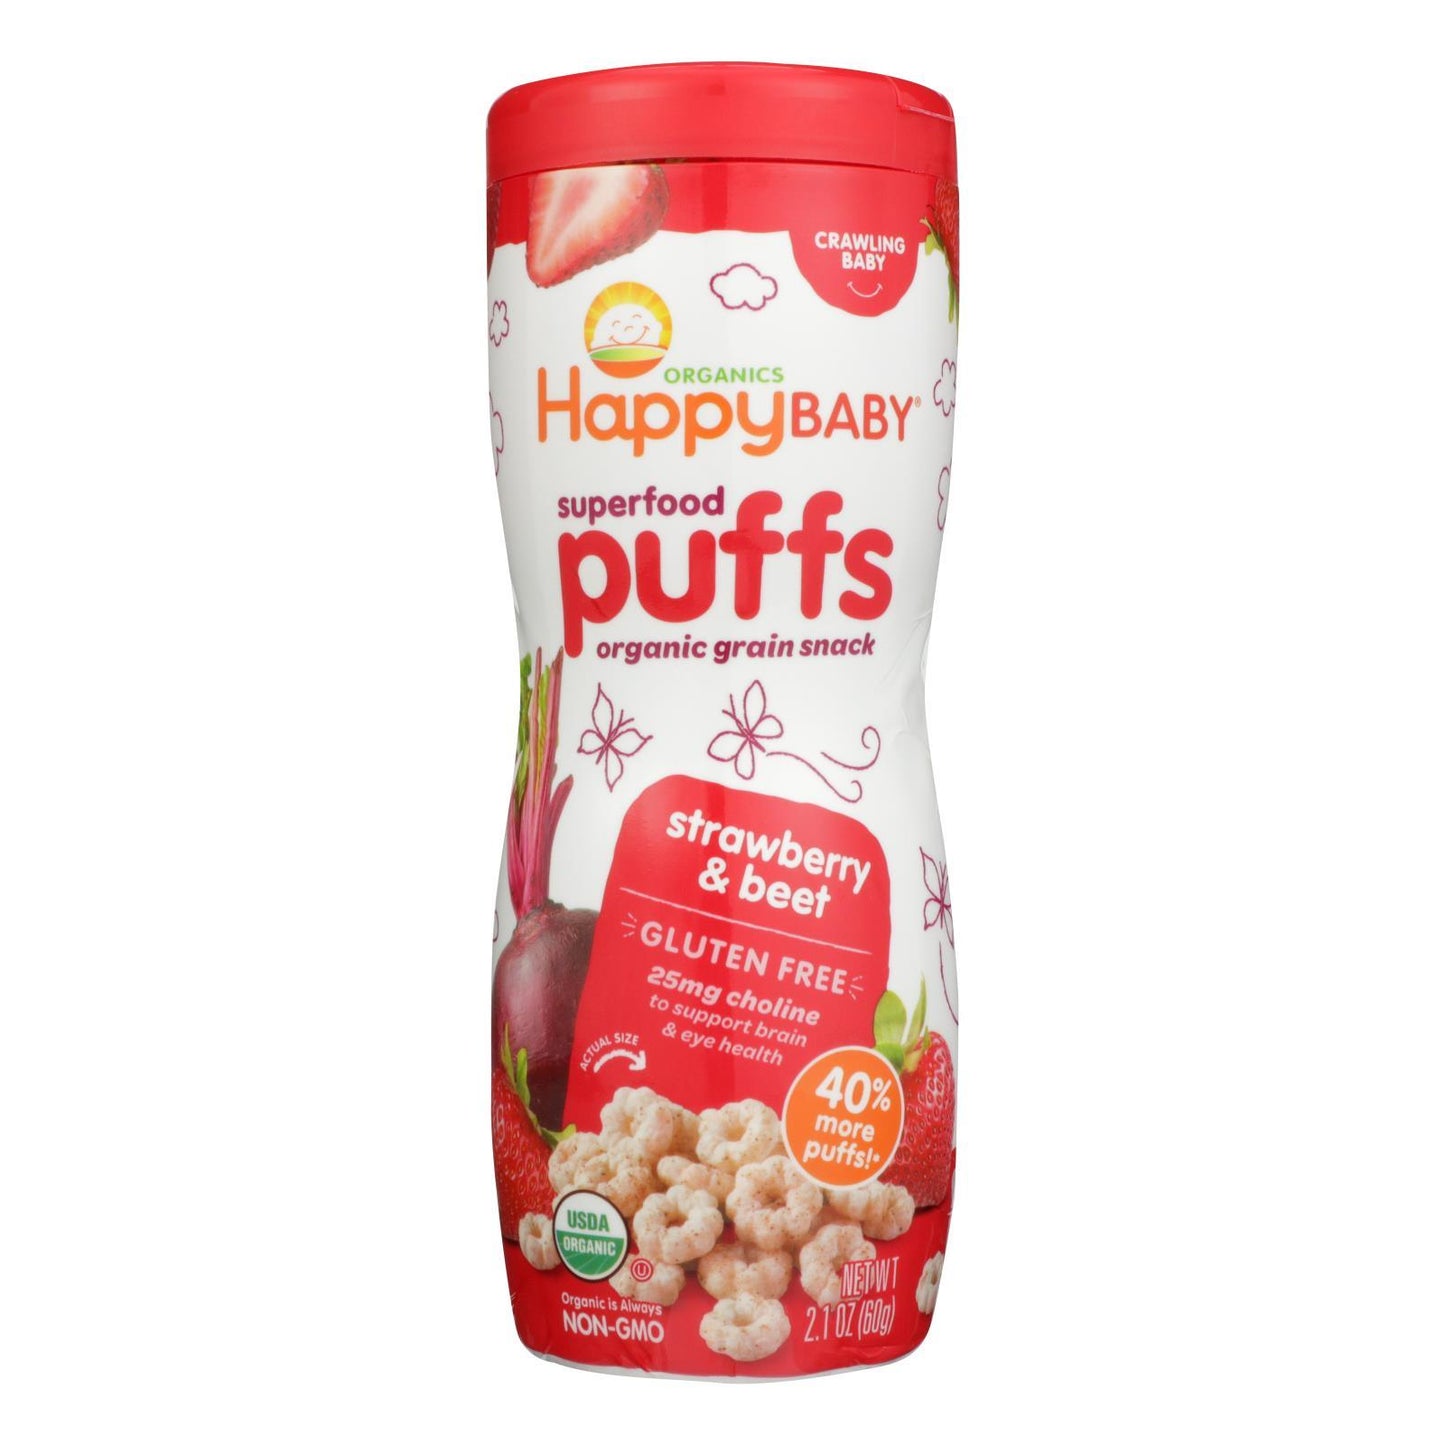 Happy Bites Organic Puffs Finger Food For Babies - Strawberry Puffs - Case Of 6 - 2.1 Oz